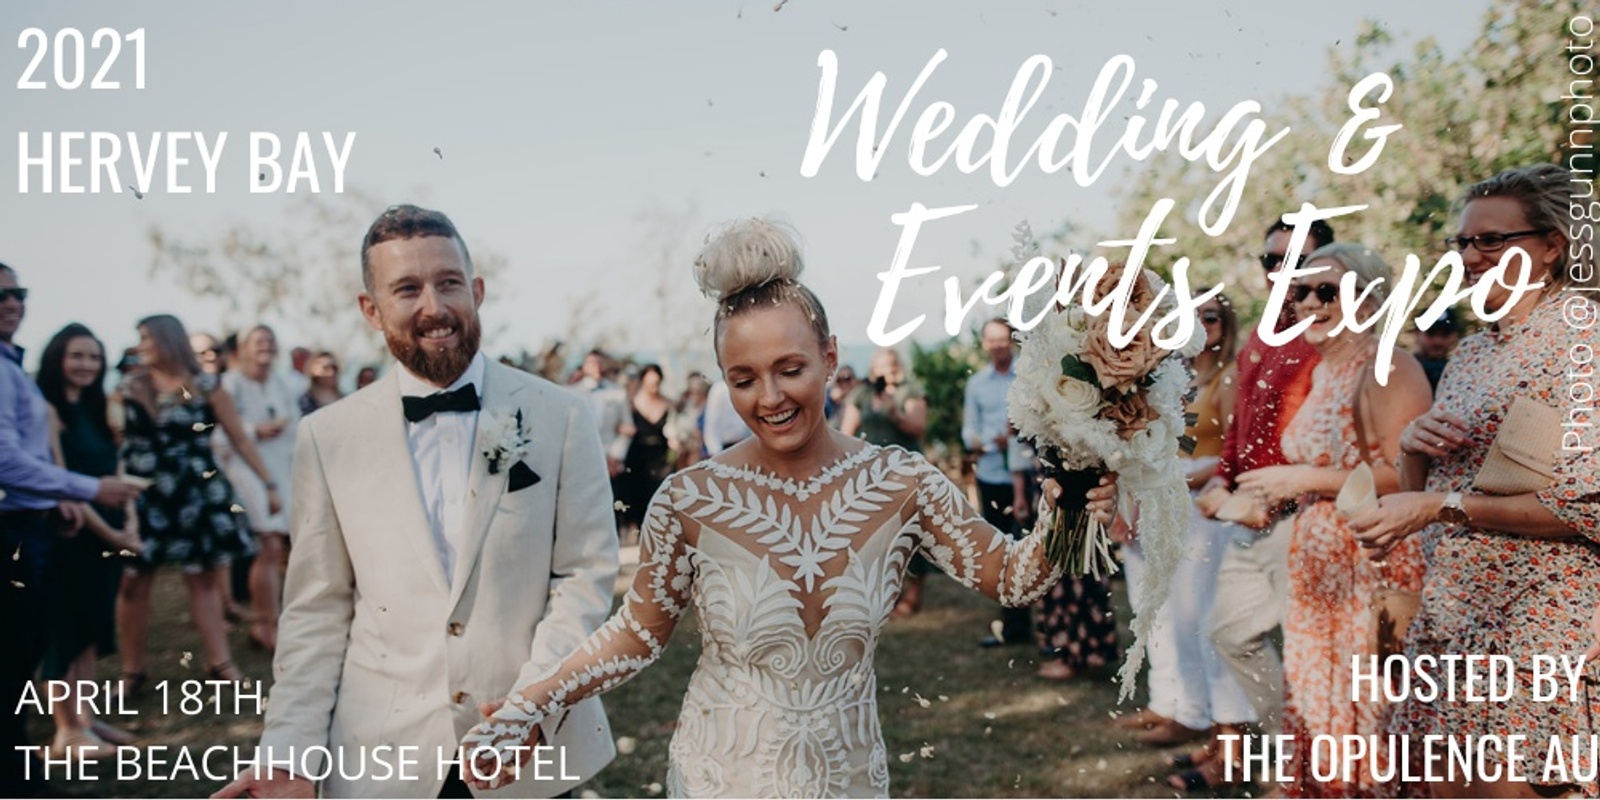 Banner image for Hervey Bay Wedding and Events Expo 2021